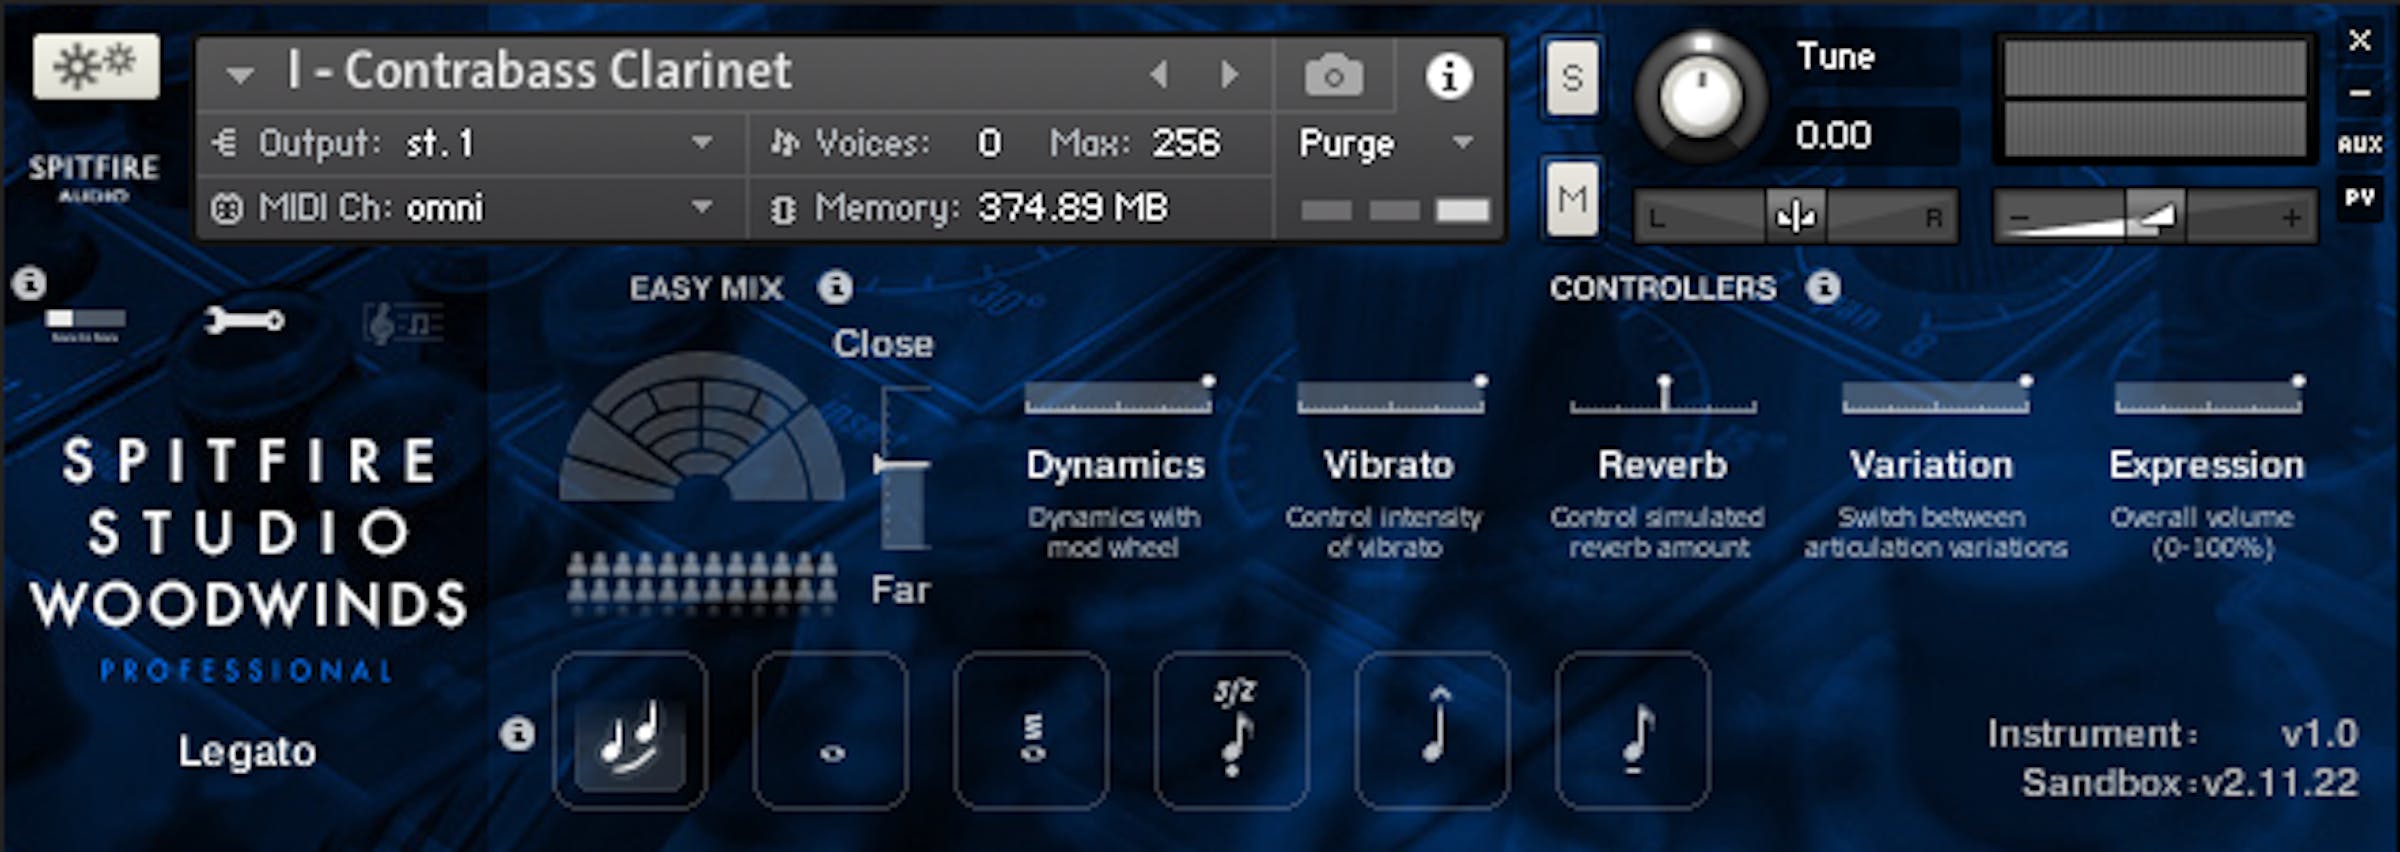 Overview panel GUI